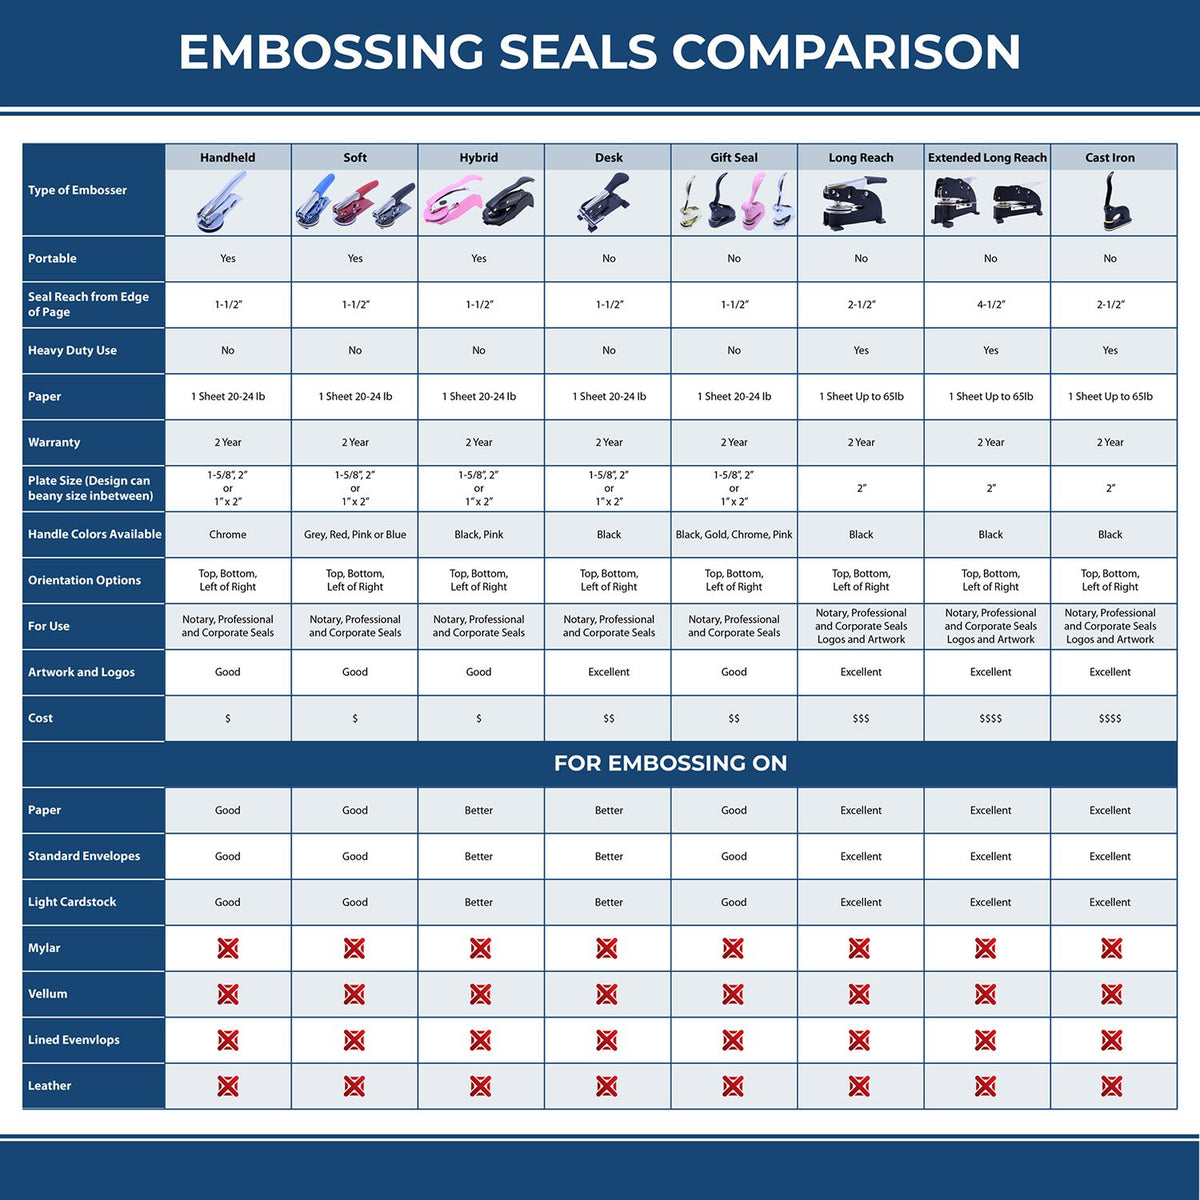 A comparison chart for the different types of mount models available for the Long Reach Kansas PE Seal.